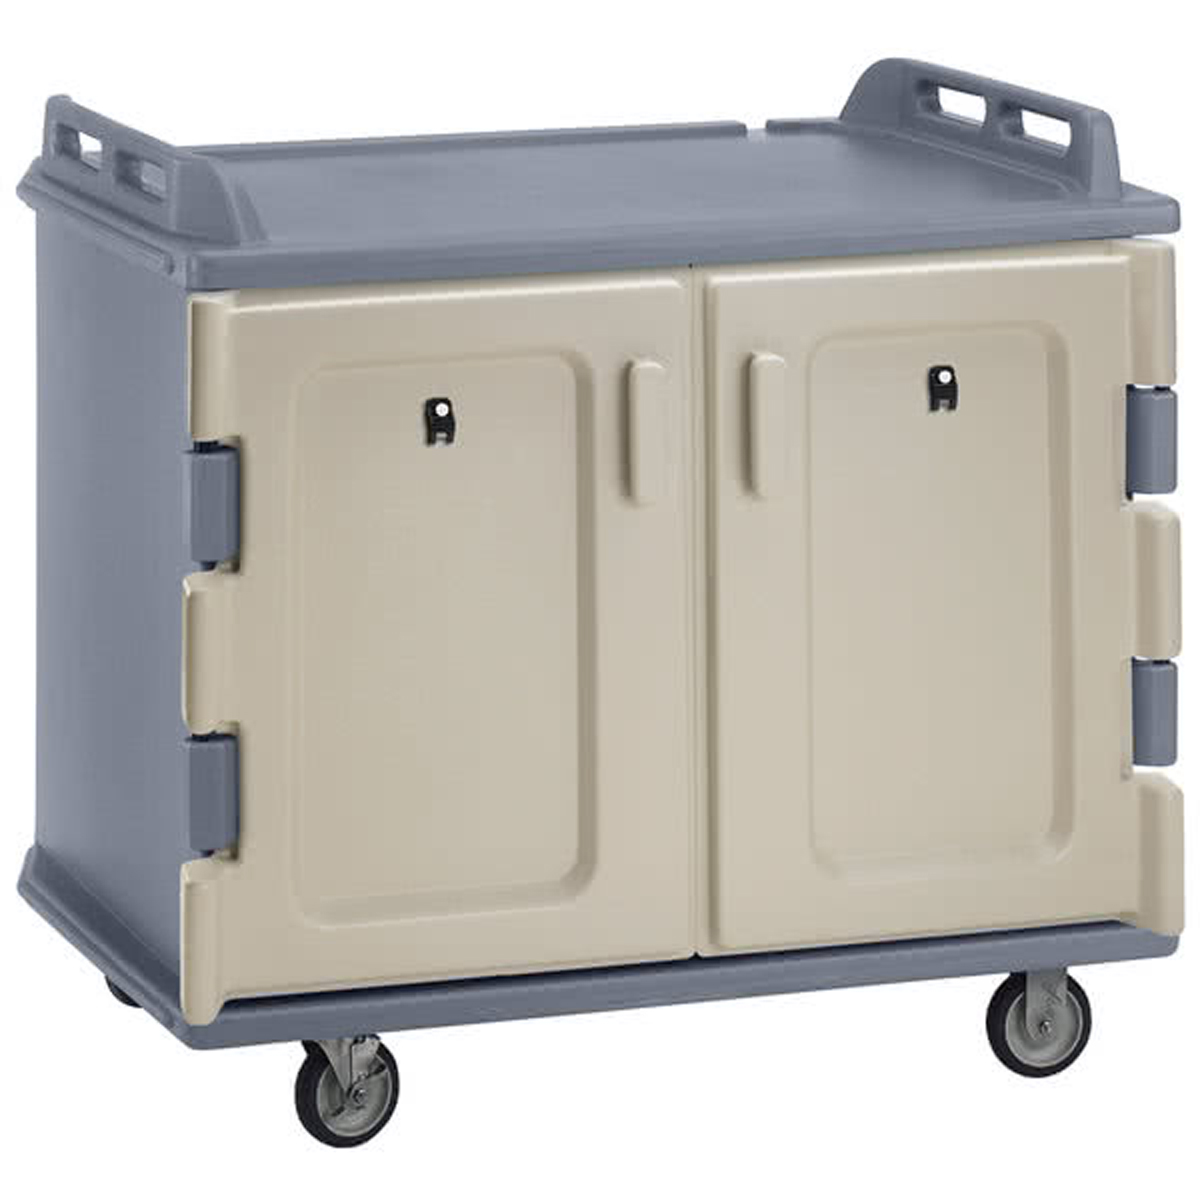 Cambro MDC1418S20191 Meal-Delivery Cart for Tray Service - 2 Compartments for 14'' x 18'' Trays - Low - Granite Gray